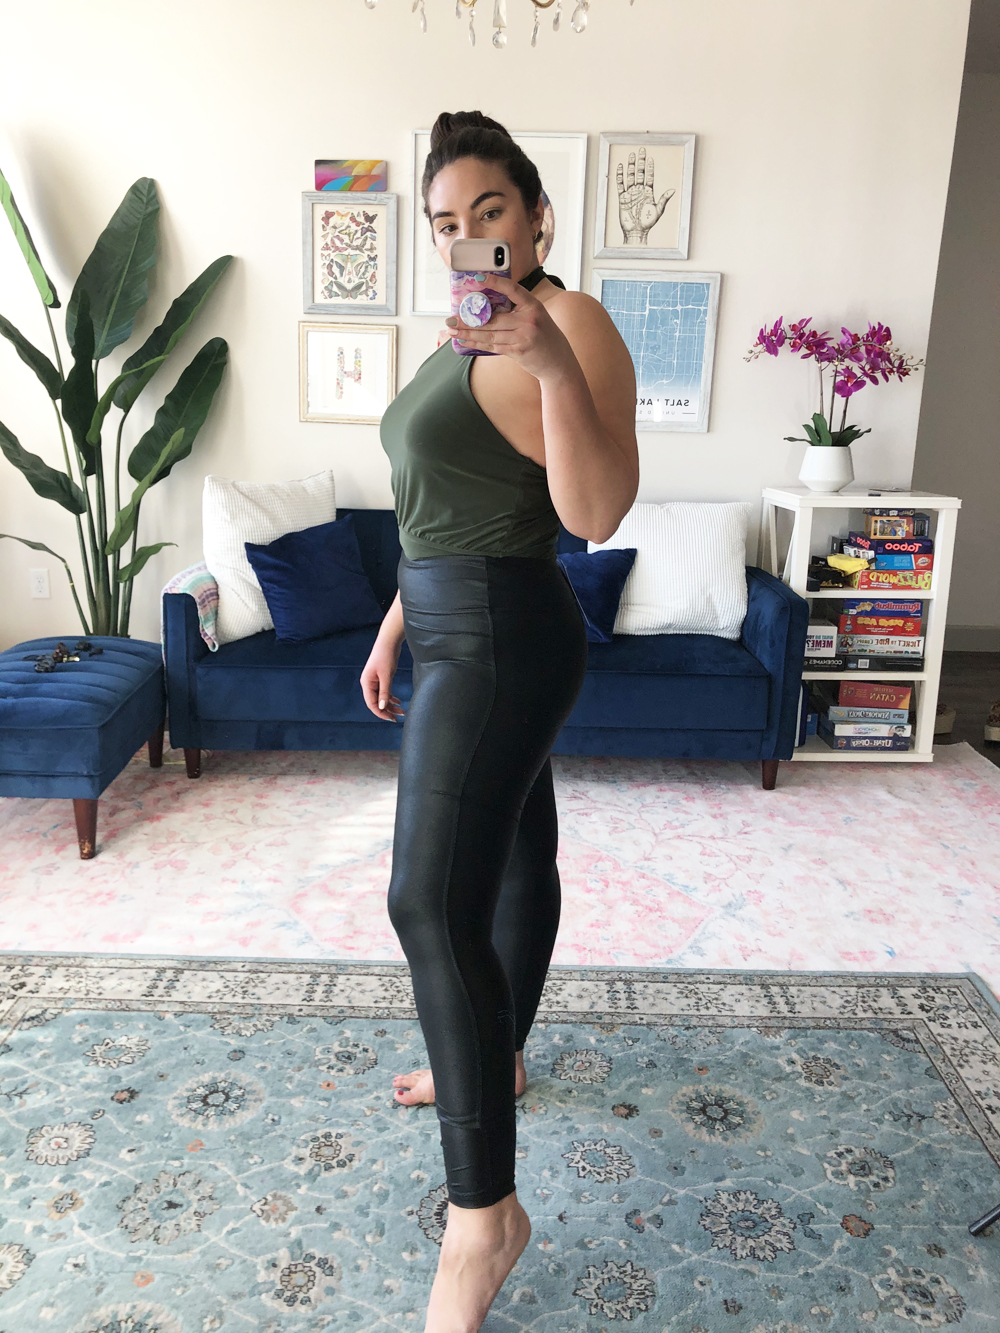 SPANX Booty Boost Active high-rise stretch leggings